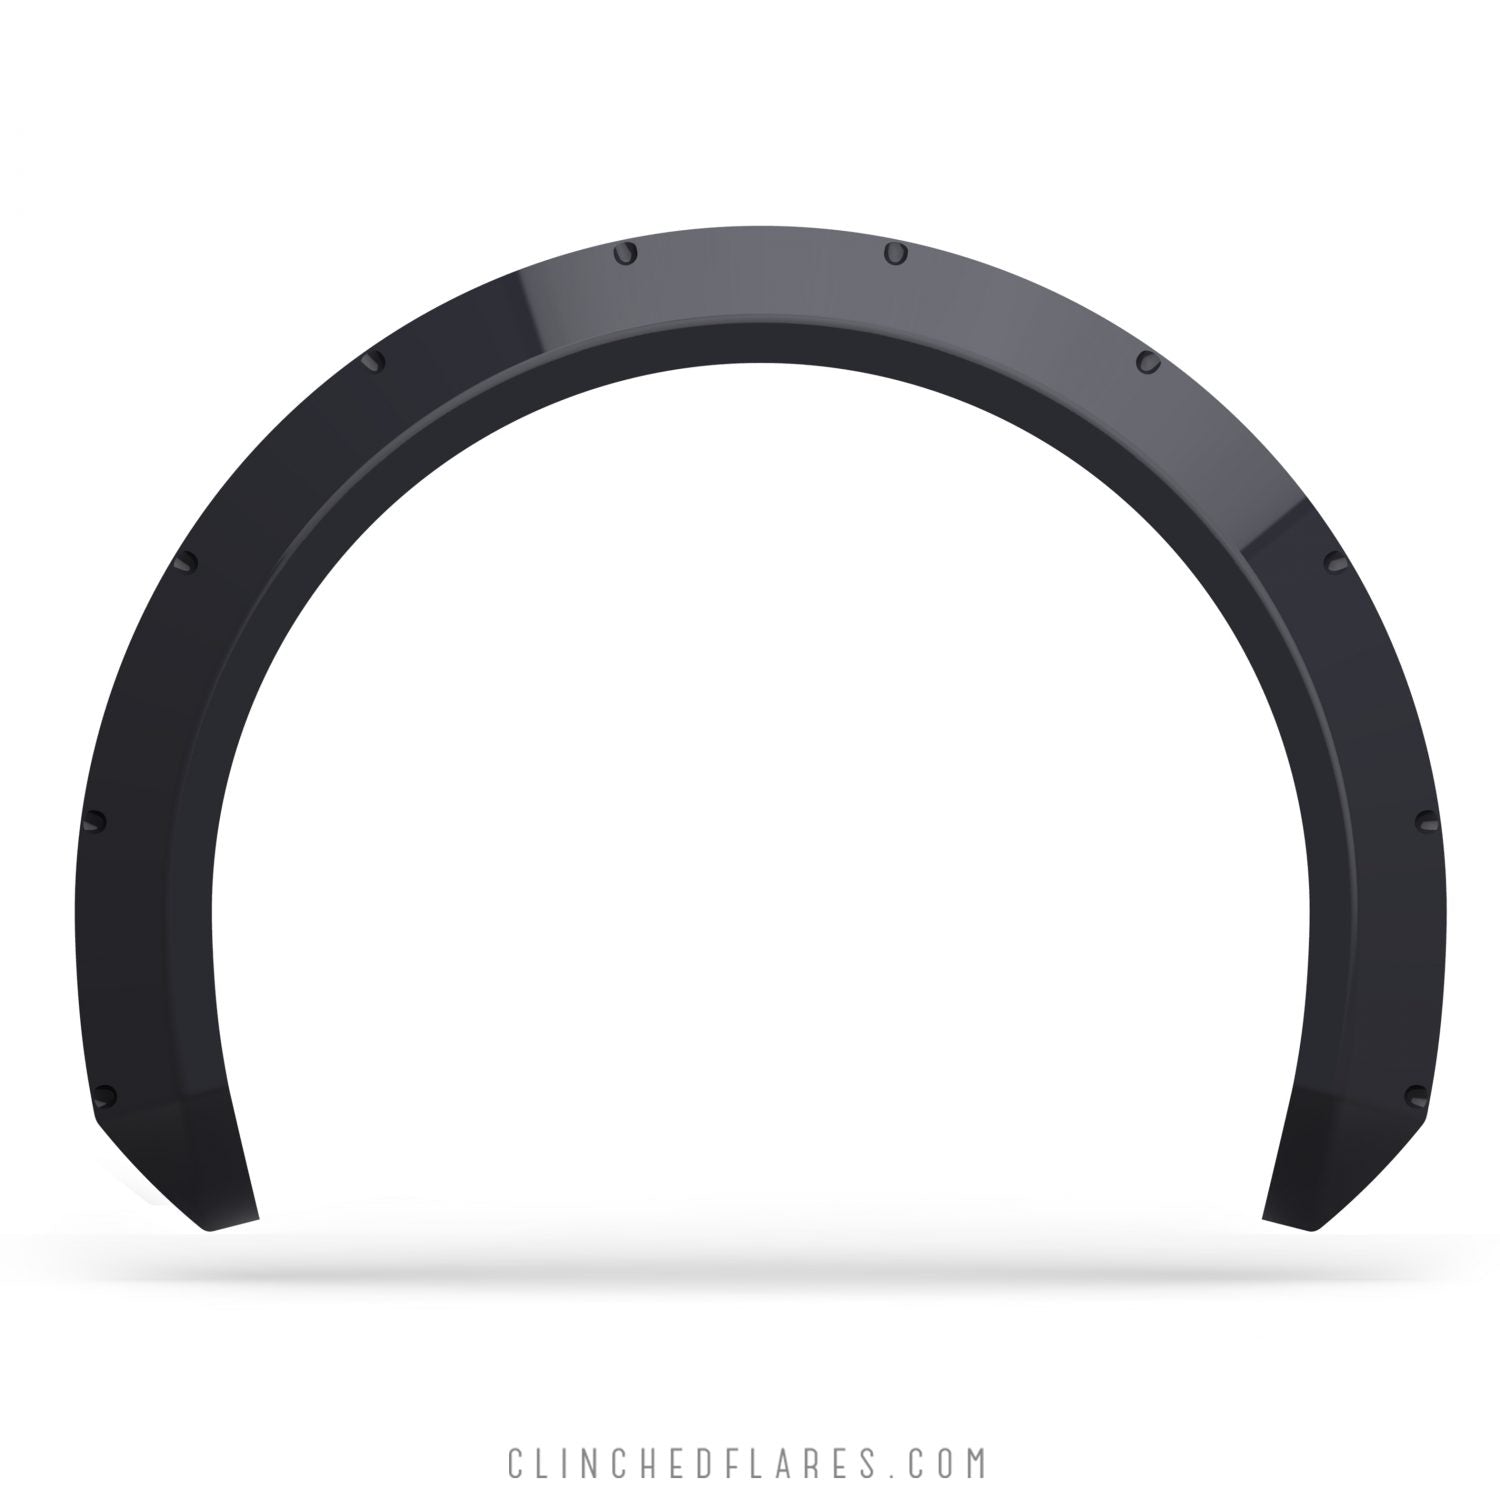 Clinched “Eurolook” 7cm (2.7″) Fender Flares